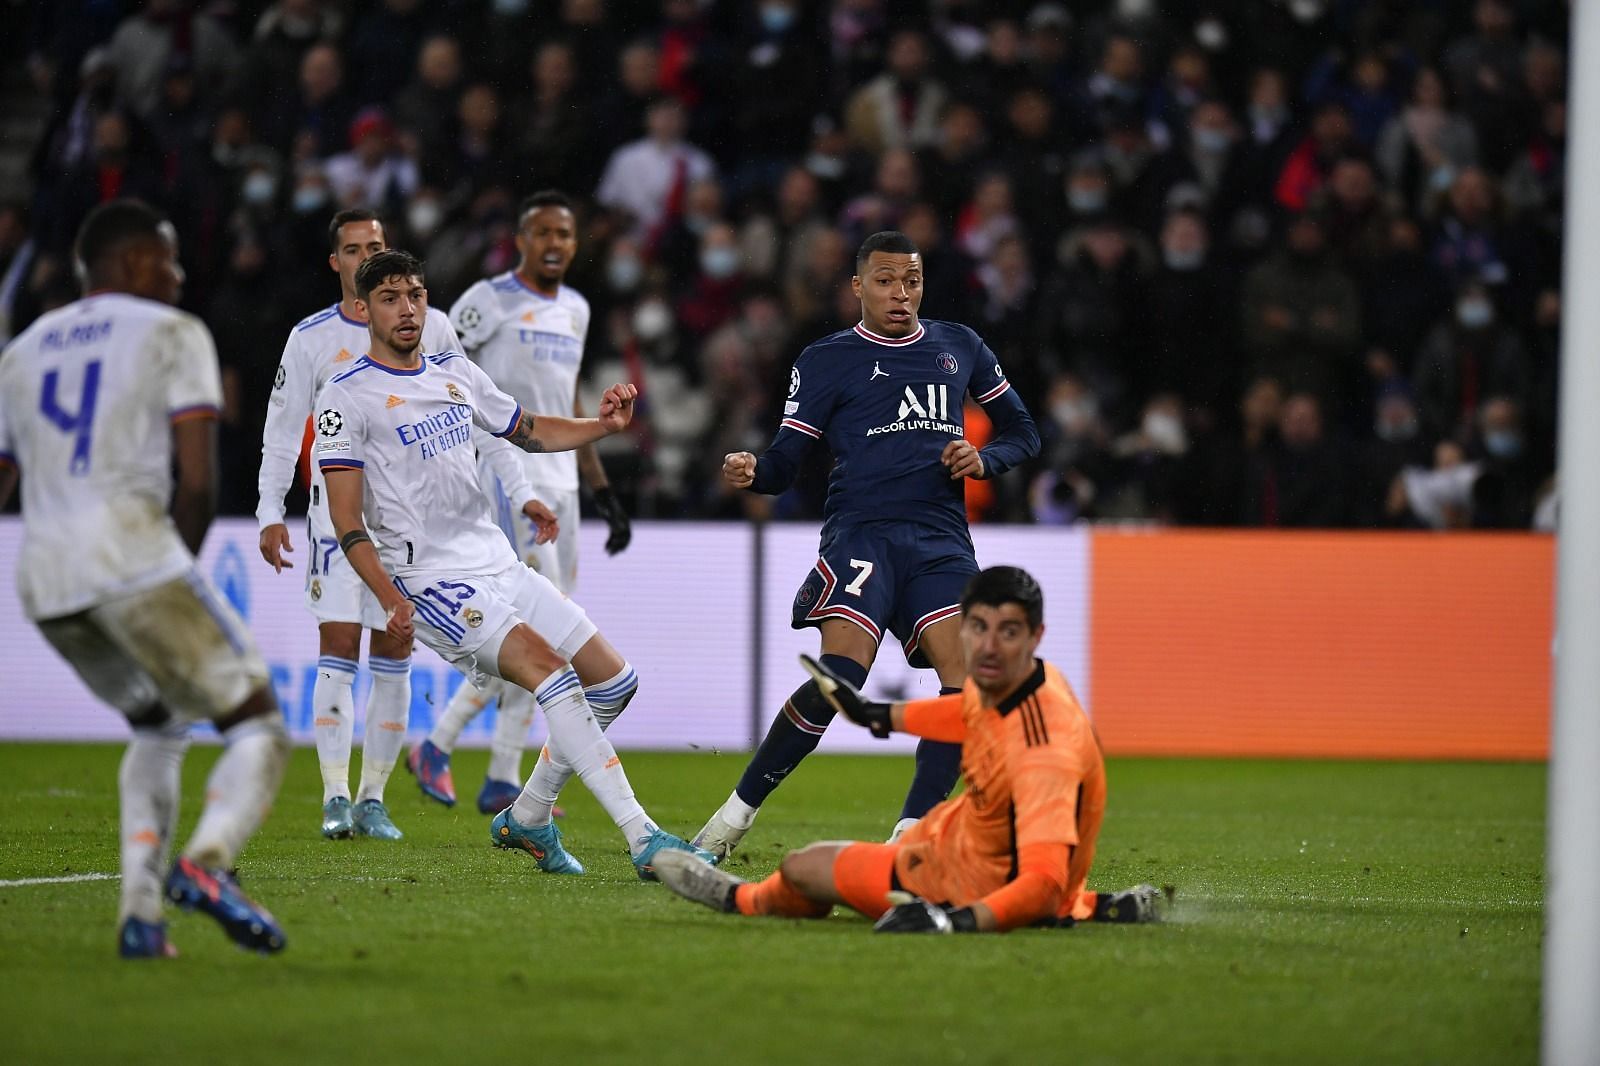 Real Madrid were beaten by PSG in the Champions League last 16 first leg